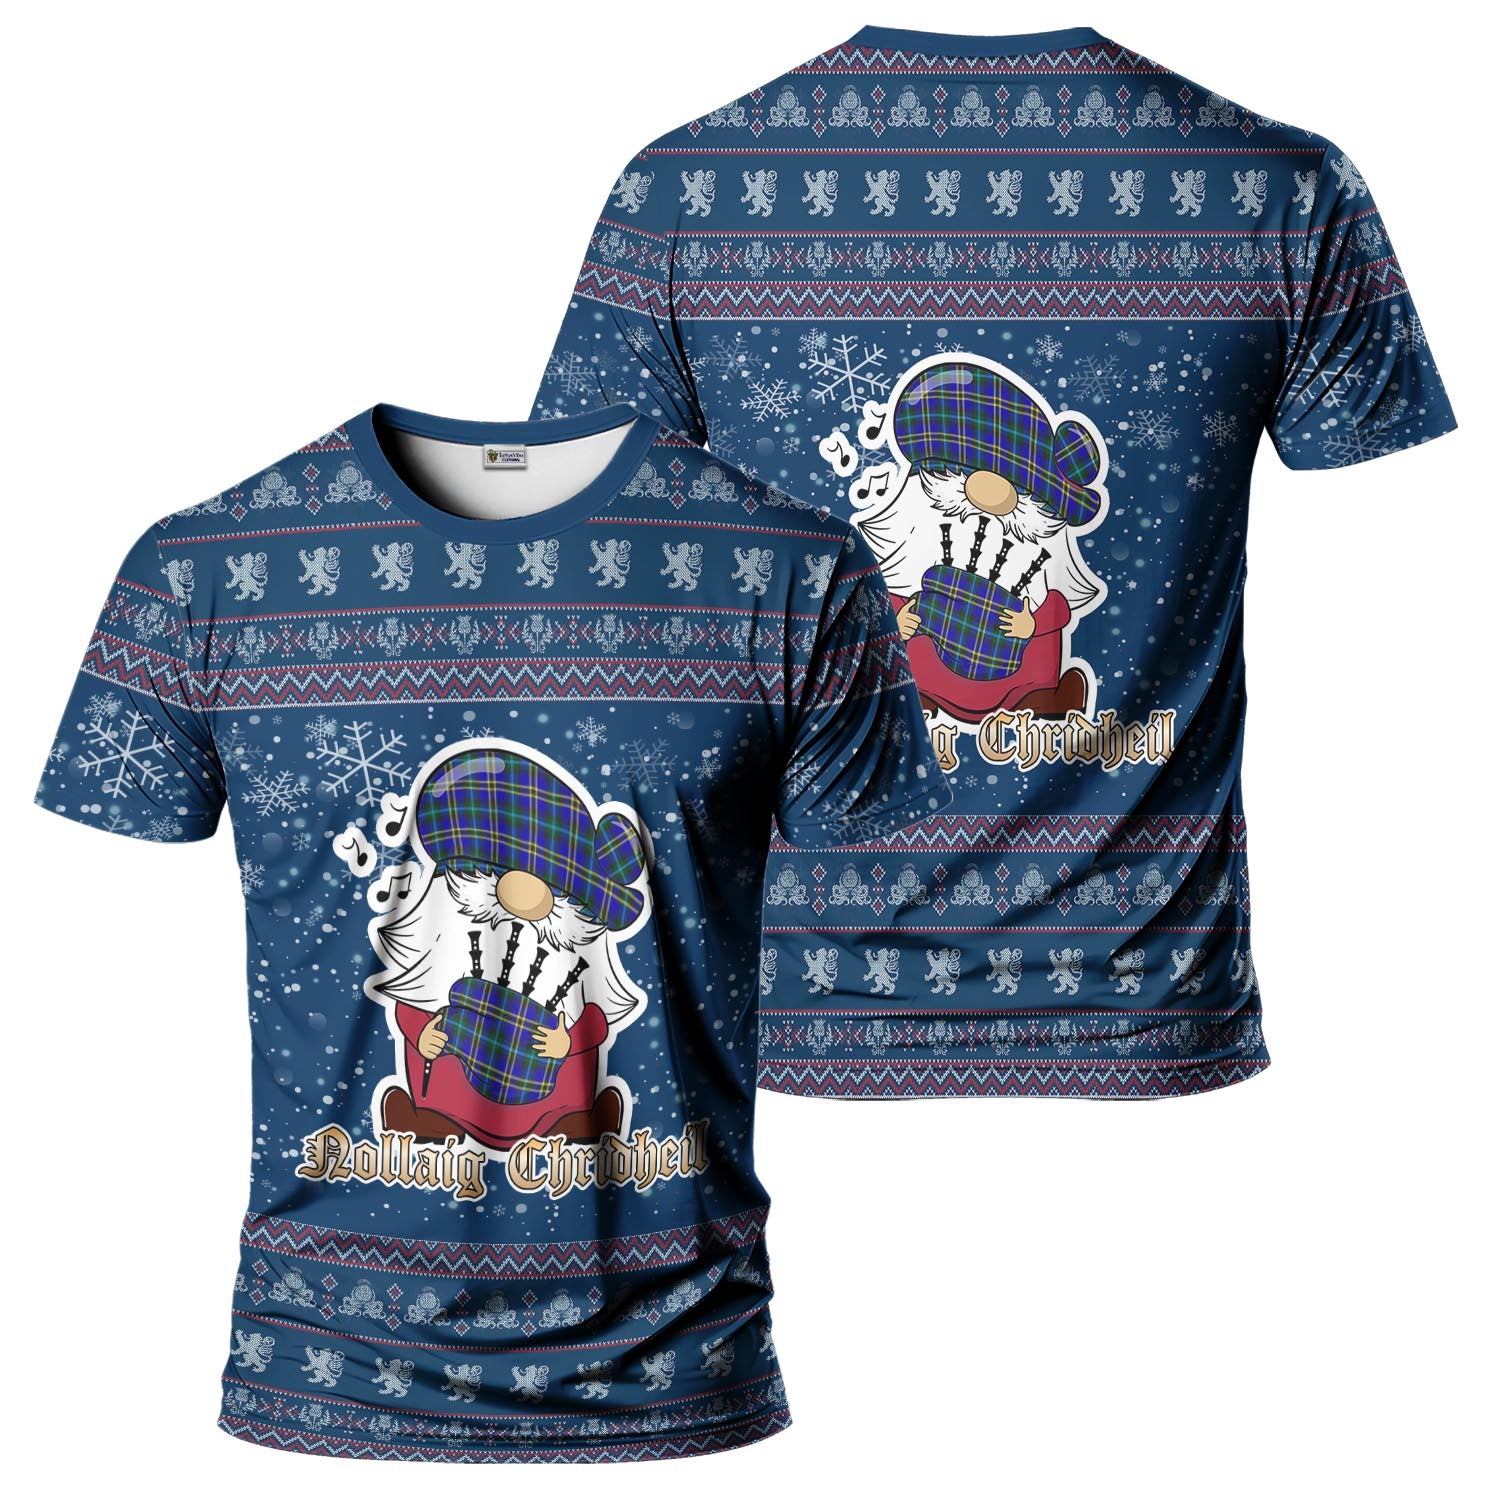 Weir Modern Clan Christmas Family T-Shirt with Funny Gnome Playing Bagpipes Kid's Shirt Blue - Tartanvibesclothing